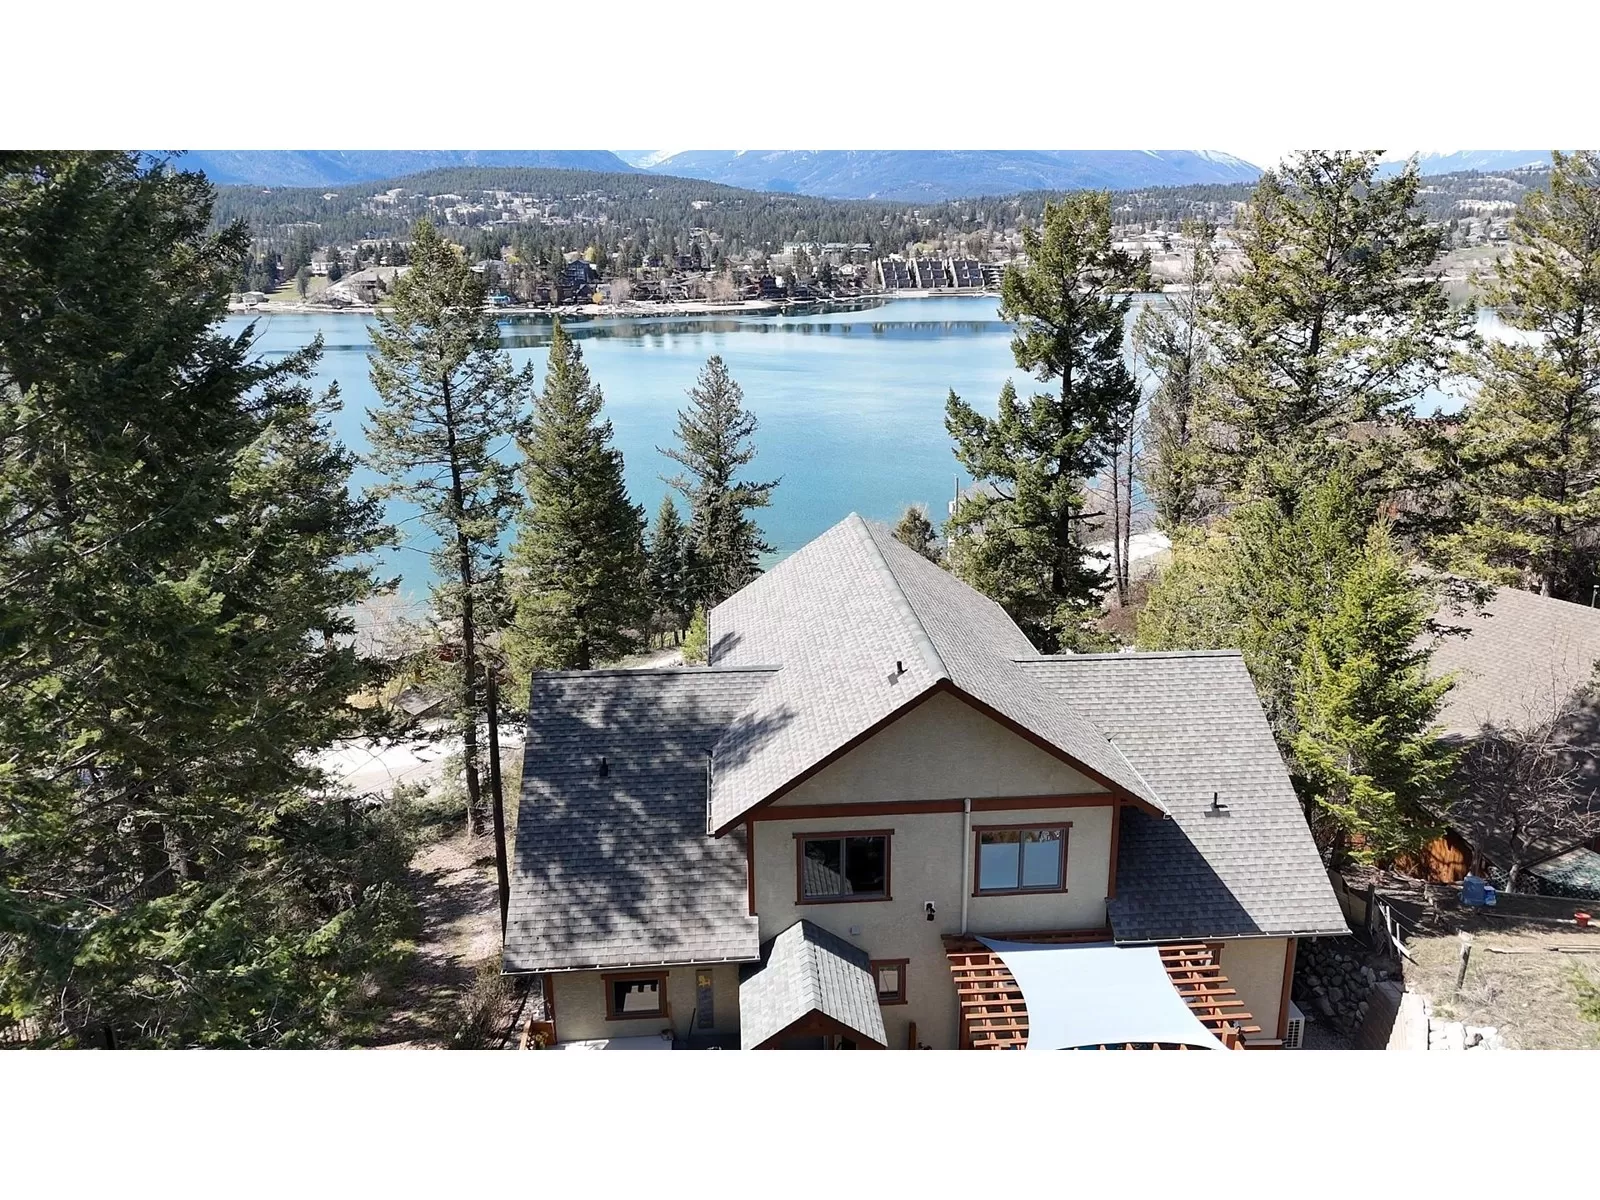 House for rent: 788 Lakeview Road, Invermere, British Columbia V0A 1K3